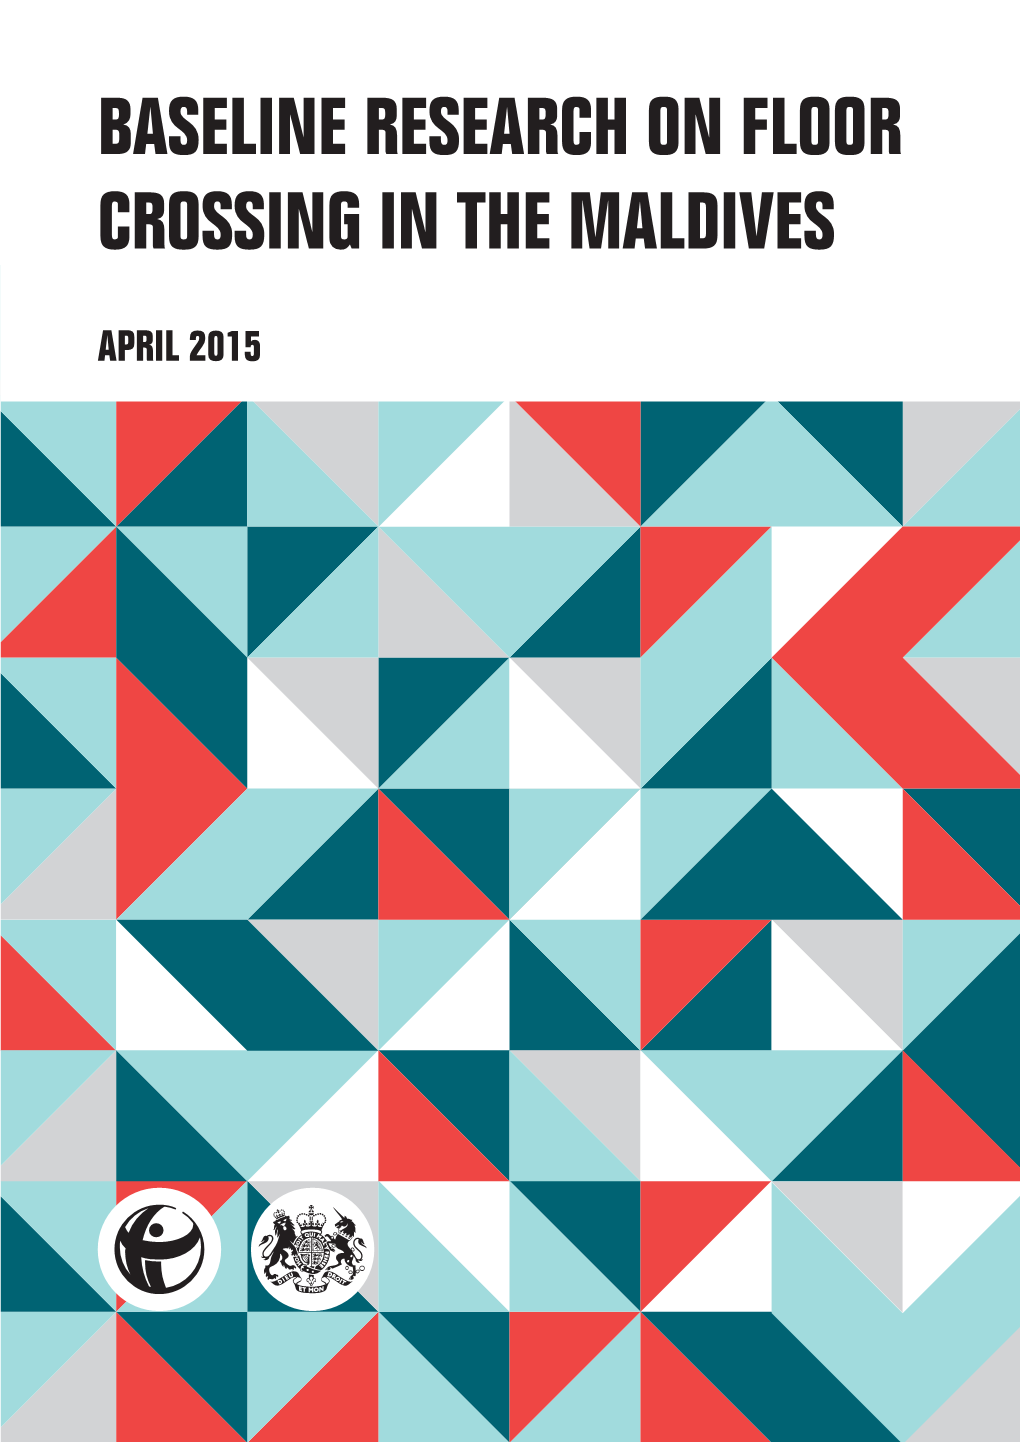 Baseline Research on Floor Crossing in the Maldives